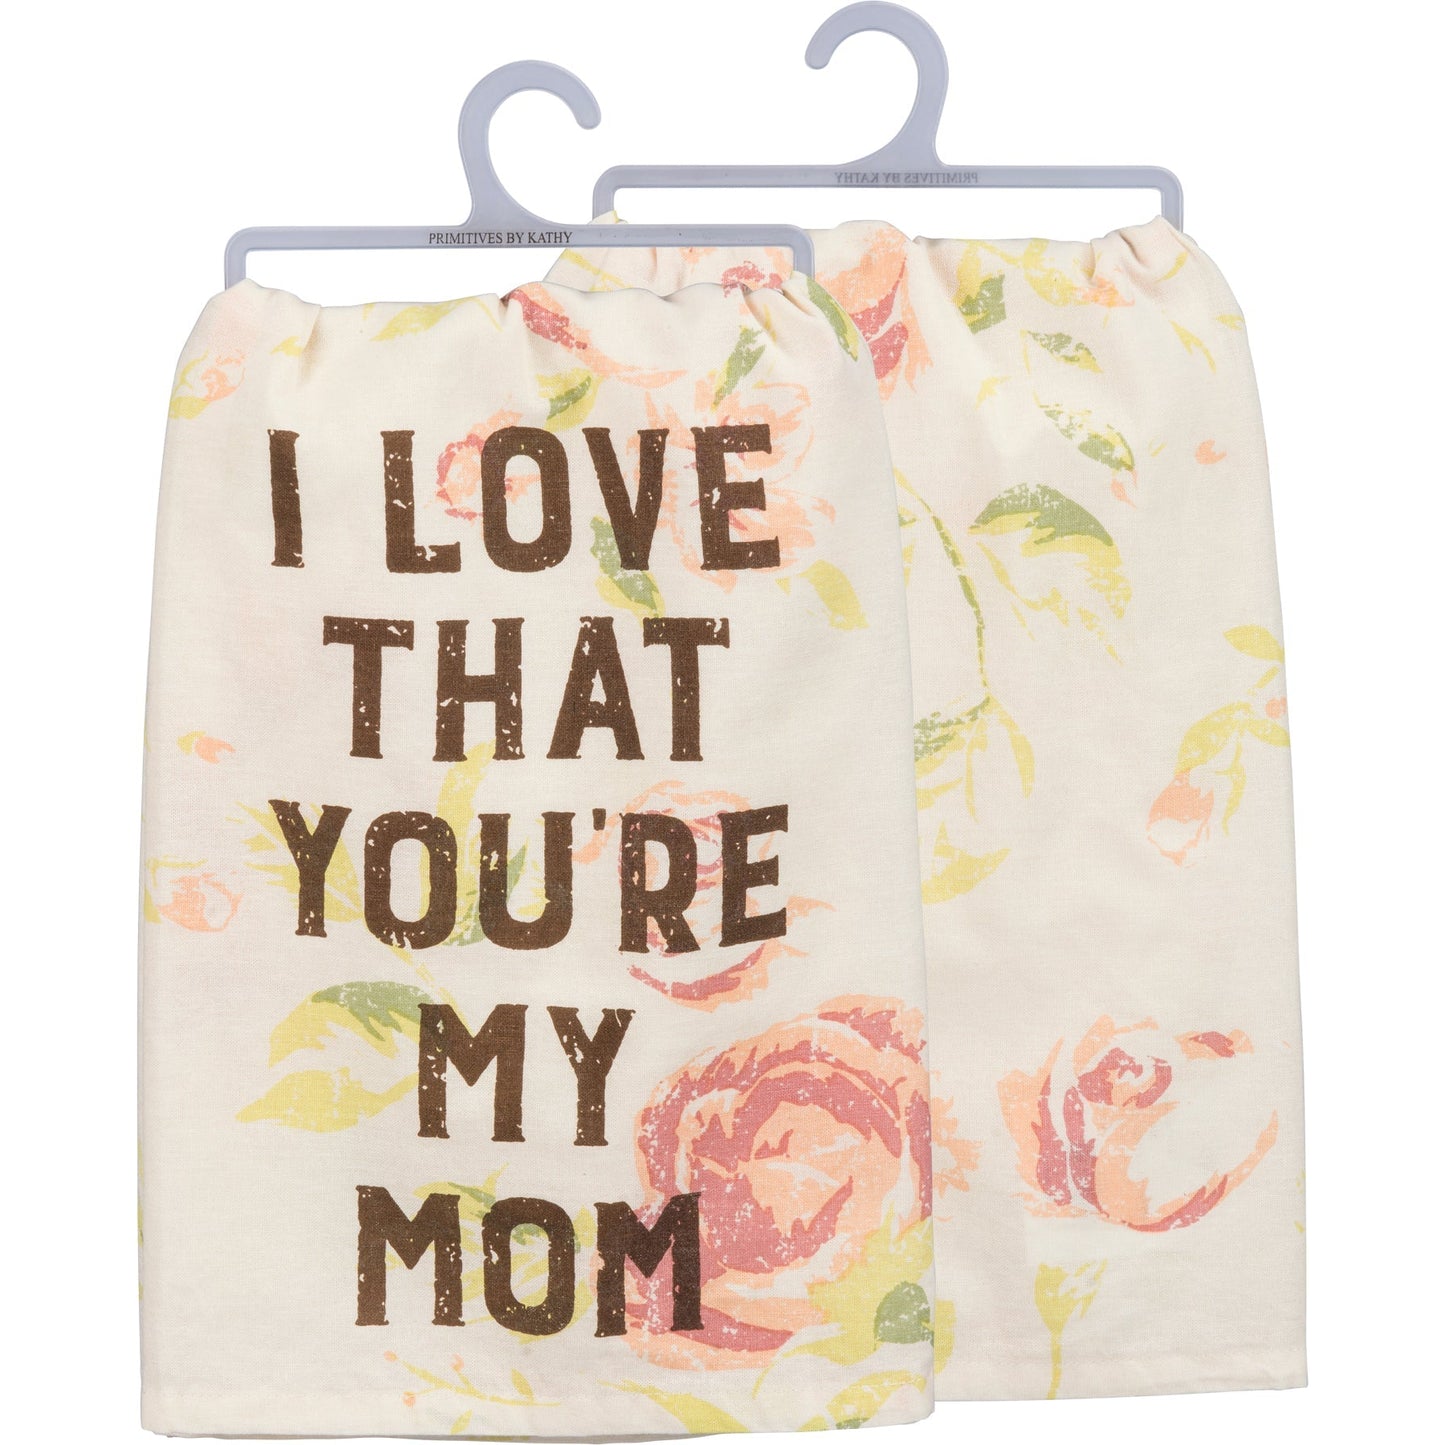 I Love That You're My Mom Pink Floral Multicolored Dish Cloth Towel / Novelty Tea Towels / Cute Farmhouse Kitchen Hand Towel